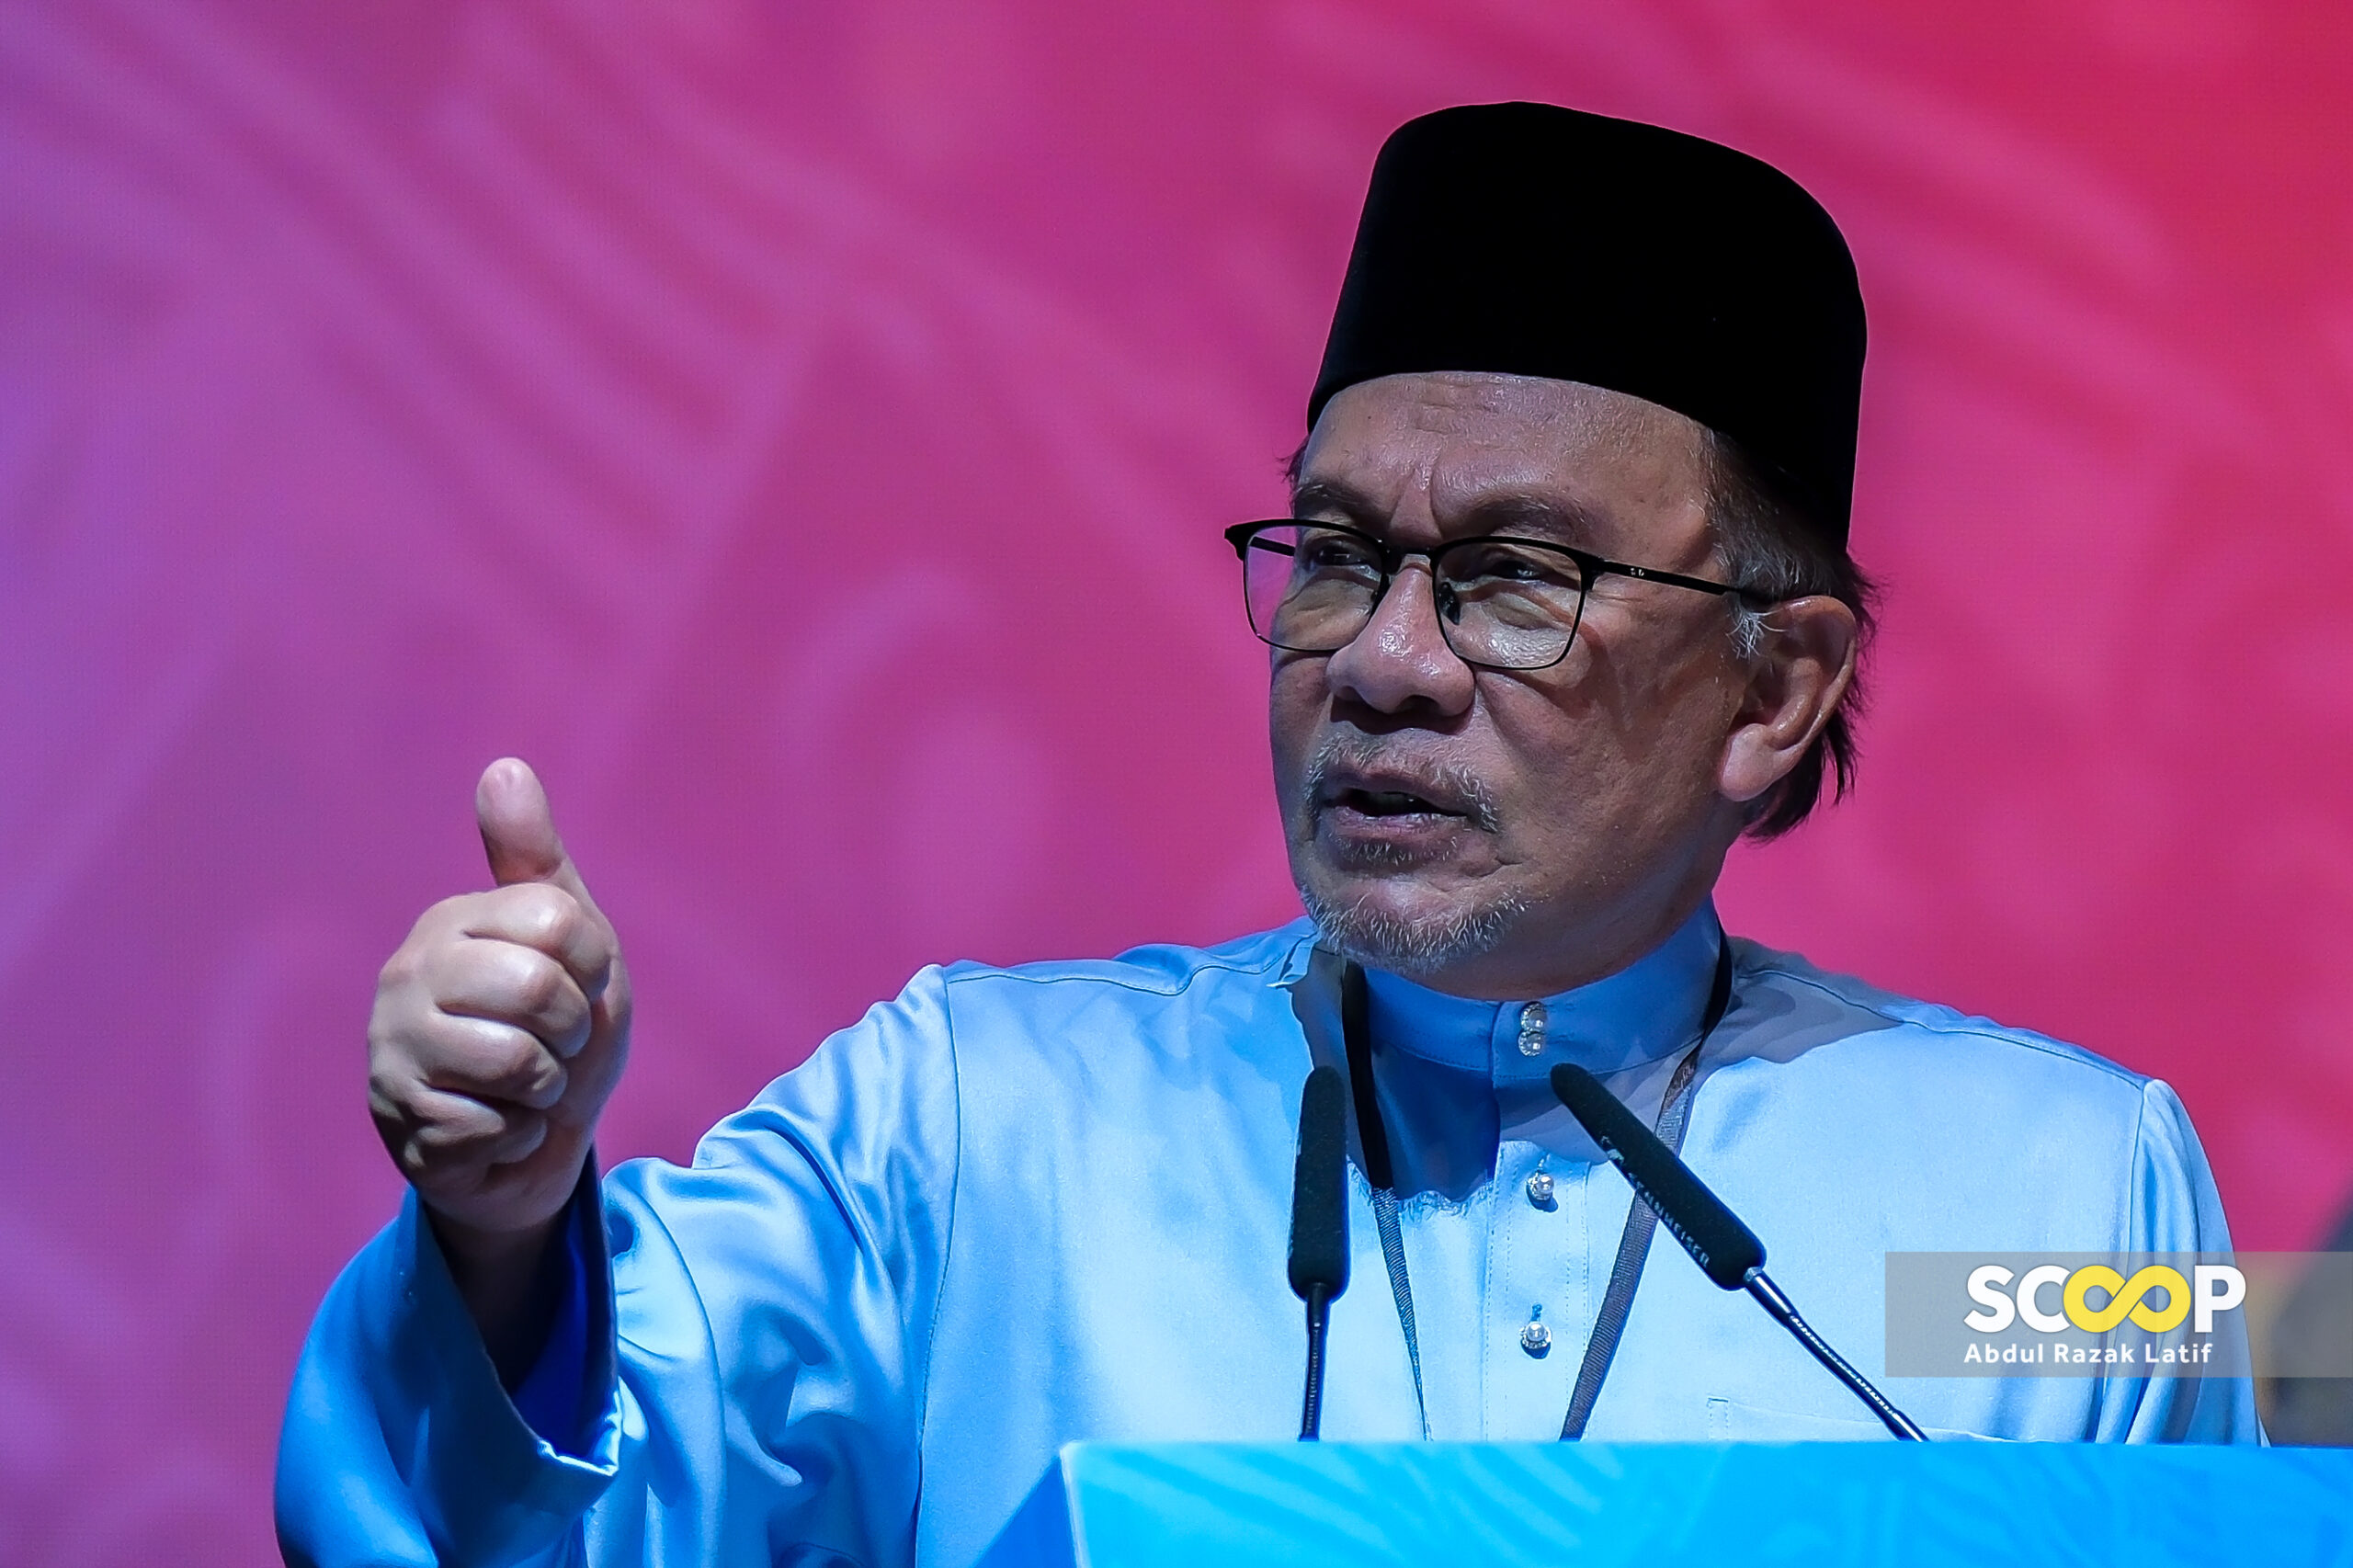 Foreign media reports on fuel subsidy cut unethical: Anwar